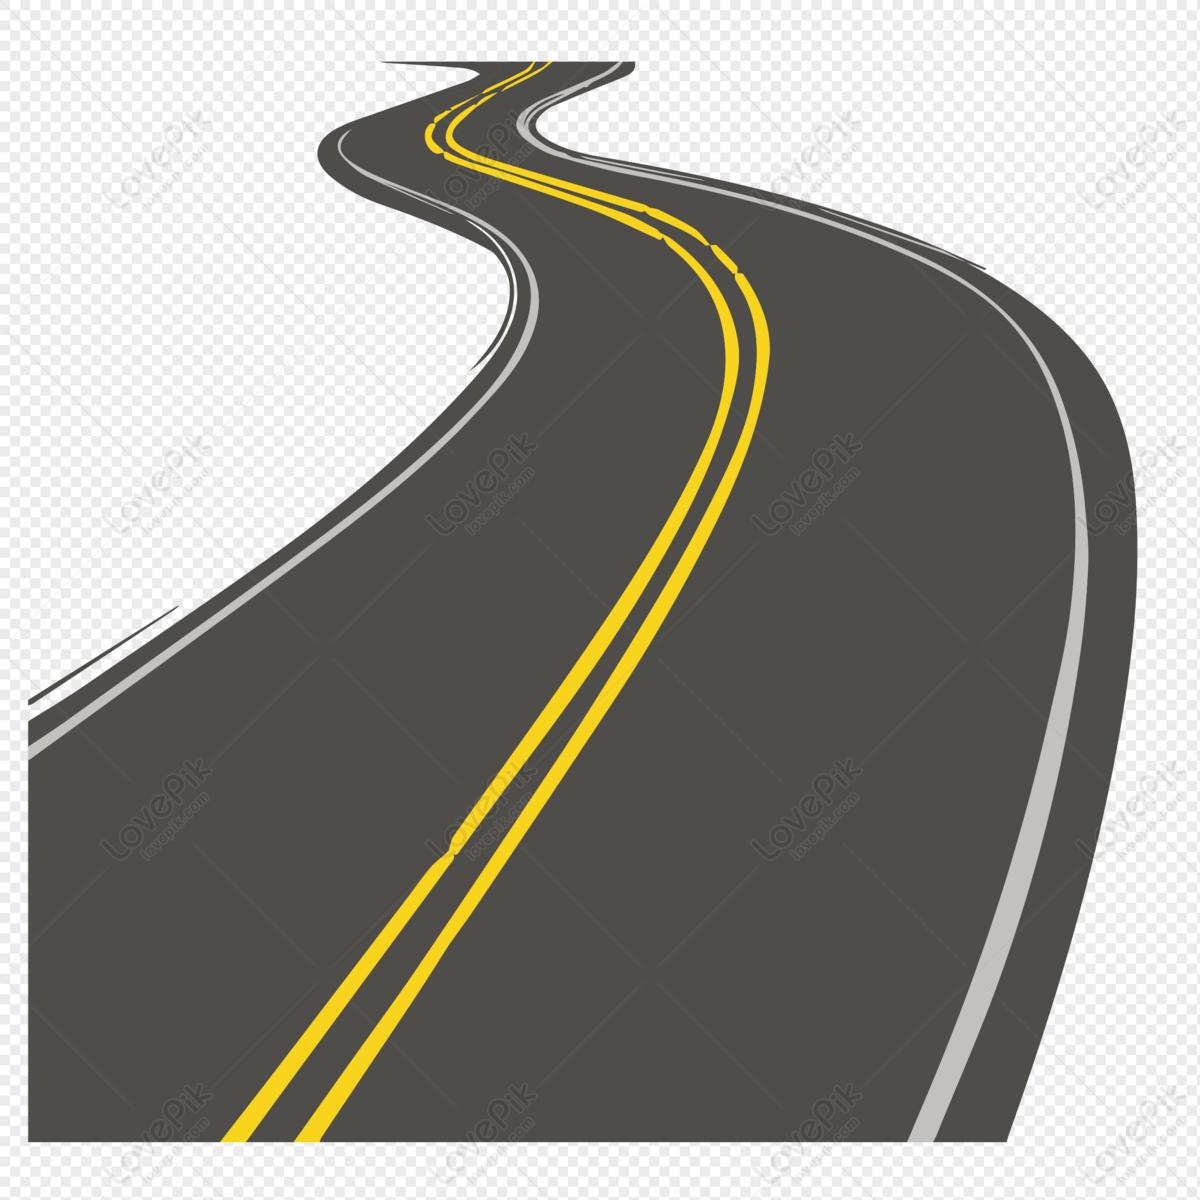 Highway PNG Transparent And Clipart Image For Free Download - Lovepik |  401707416